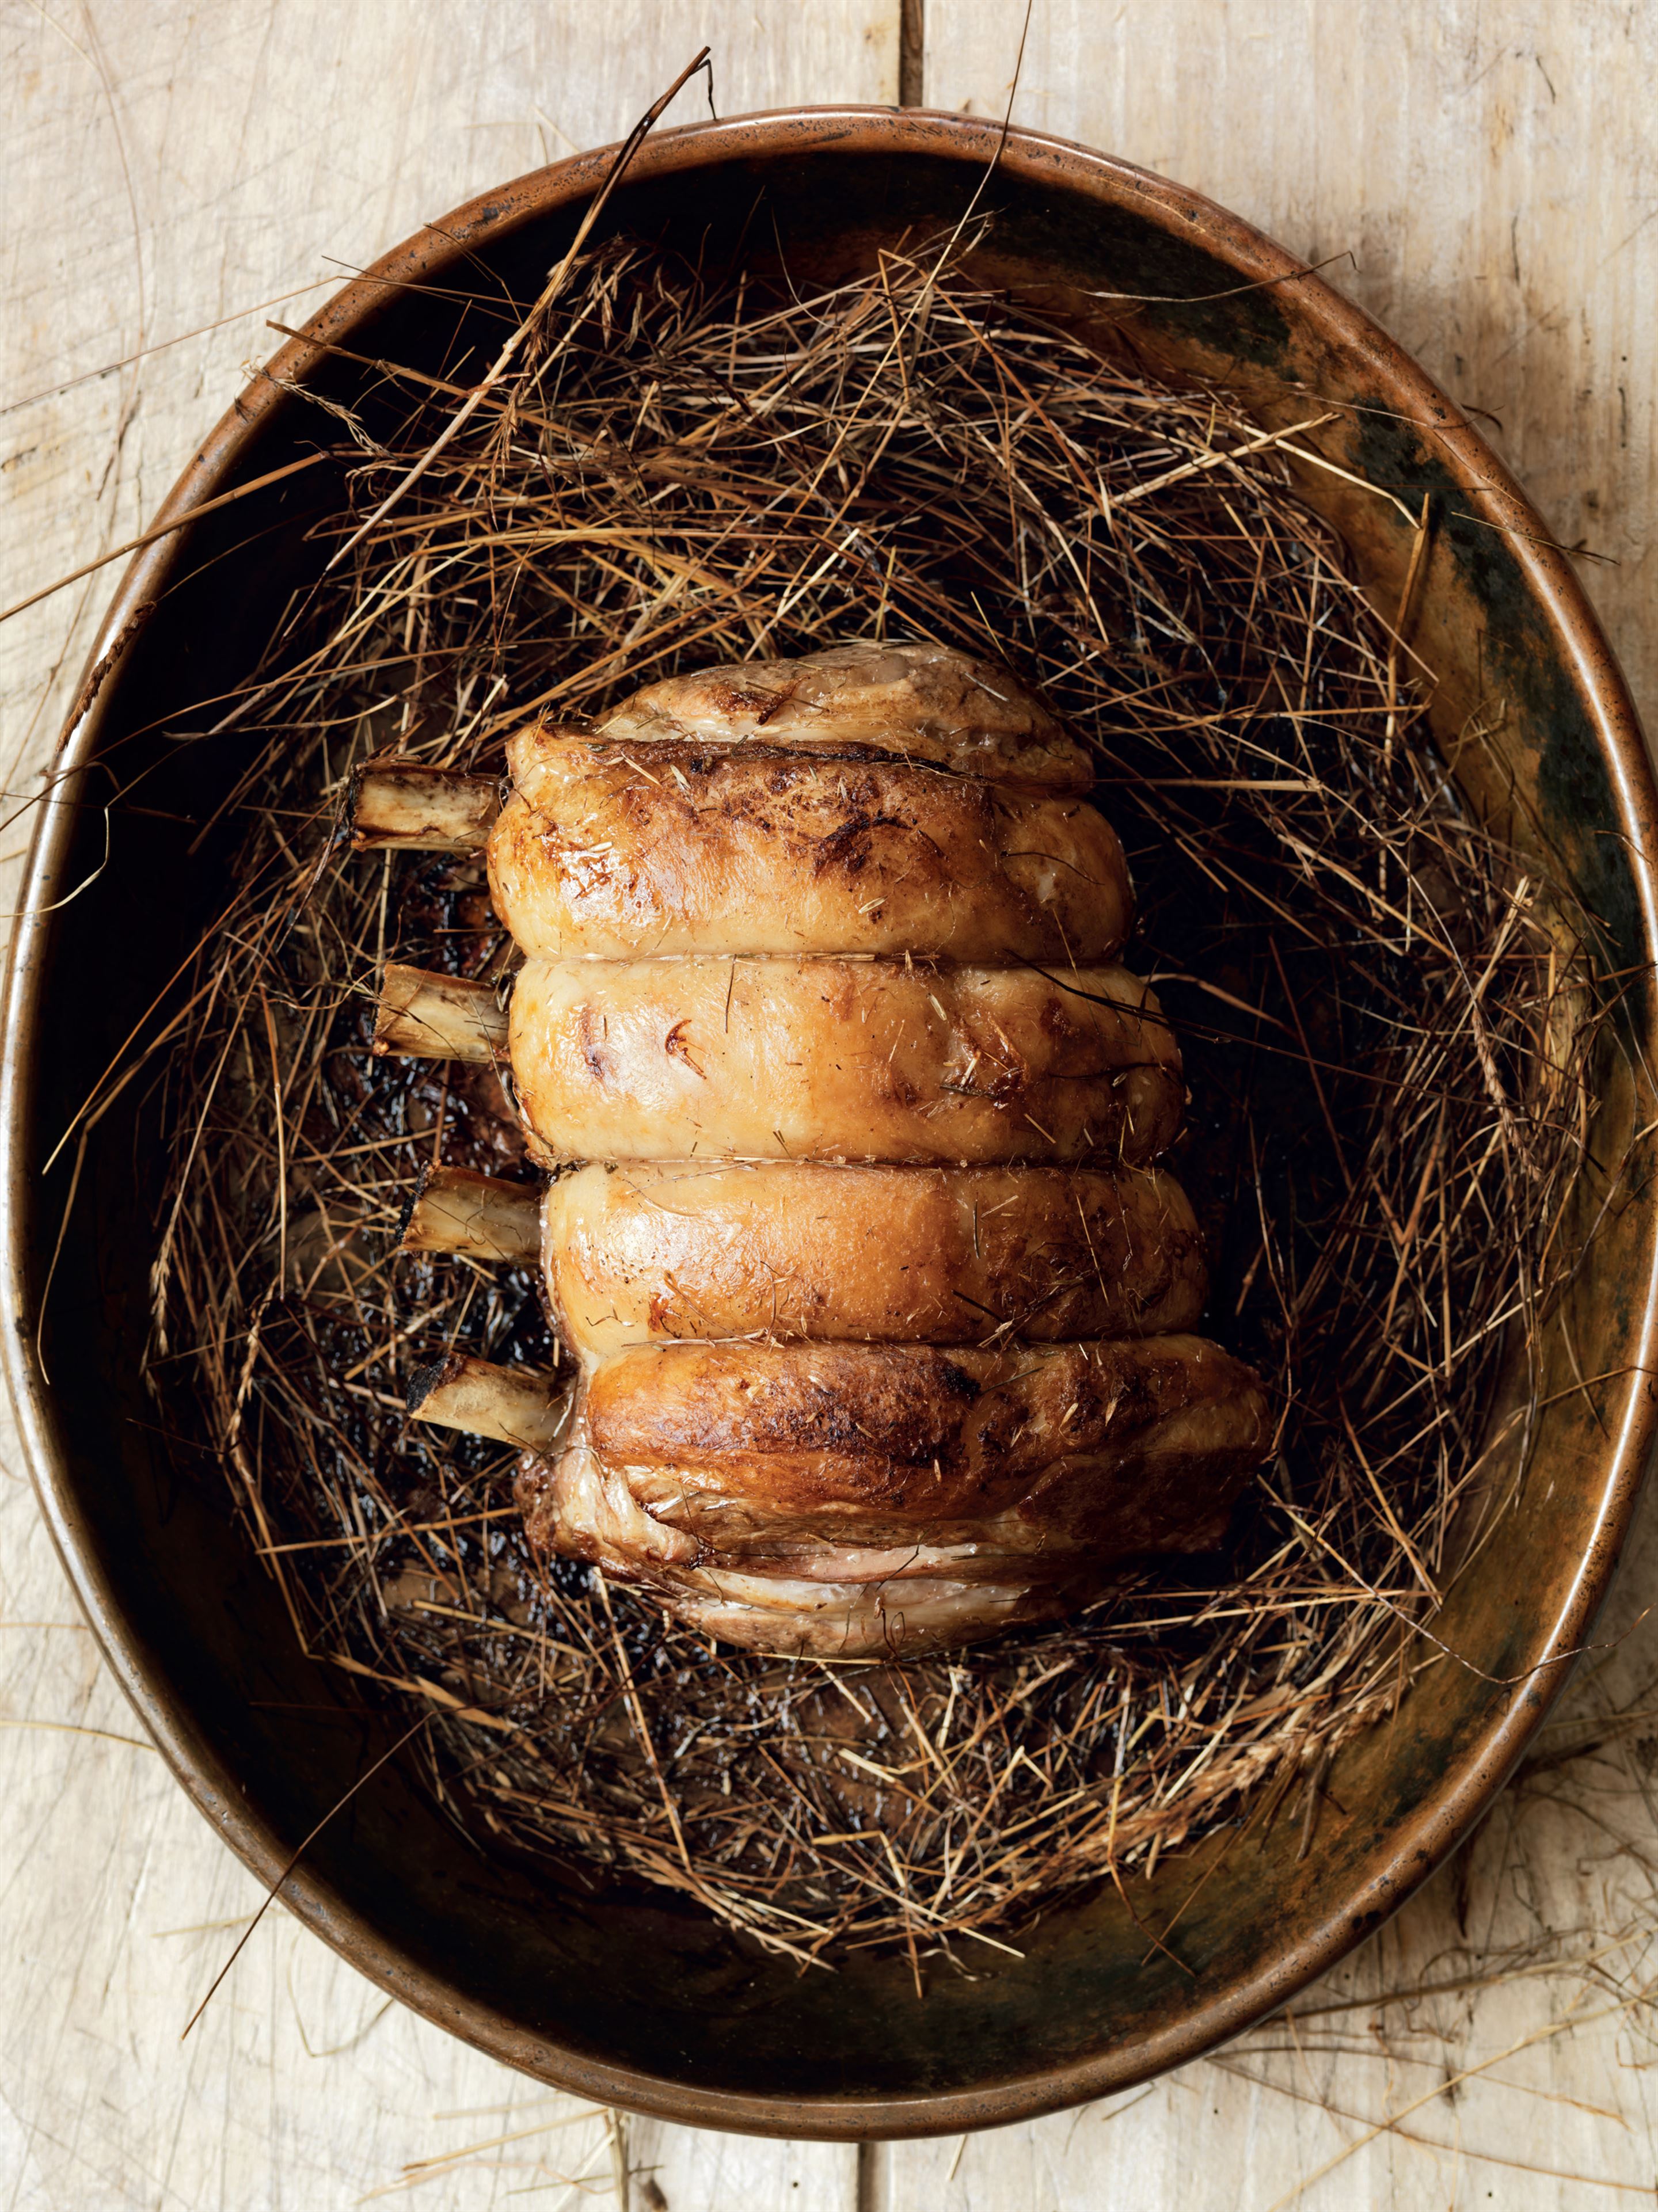 Veal baked in hay